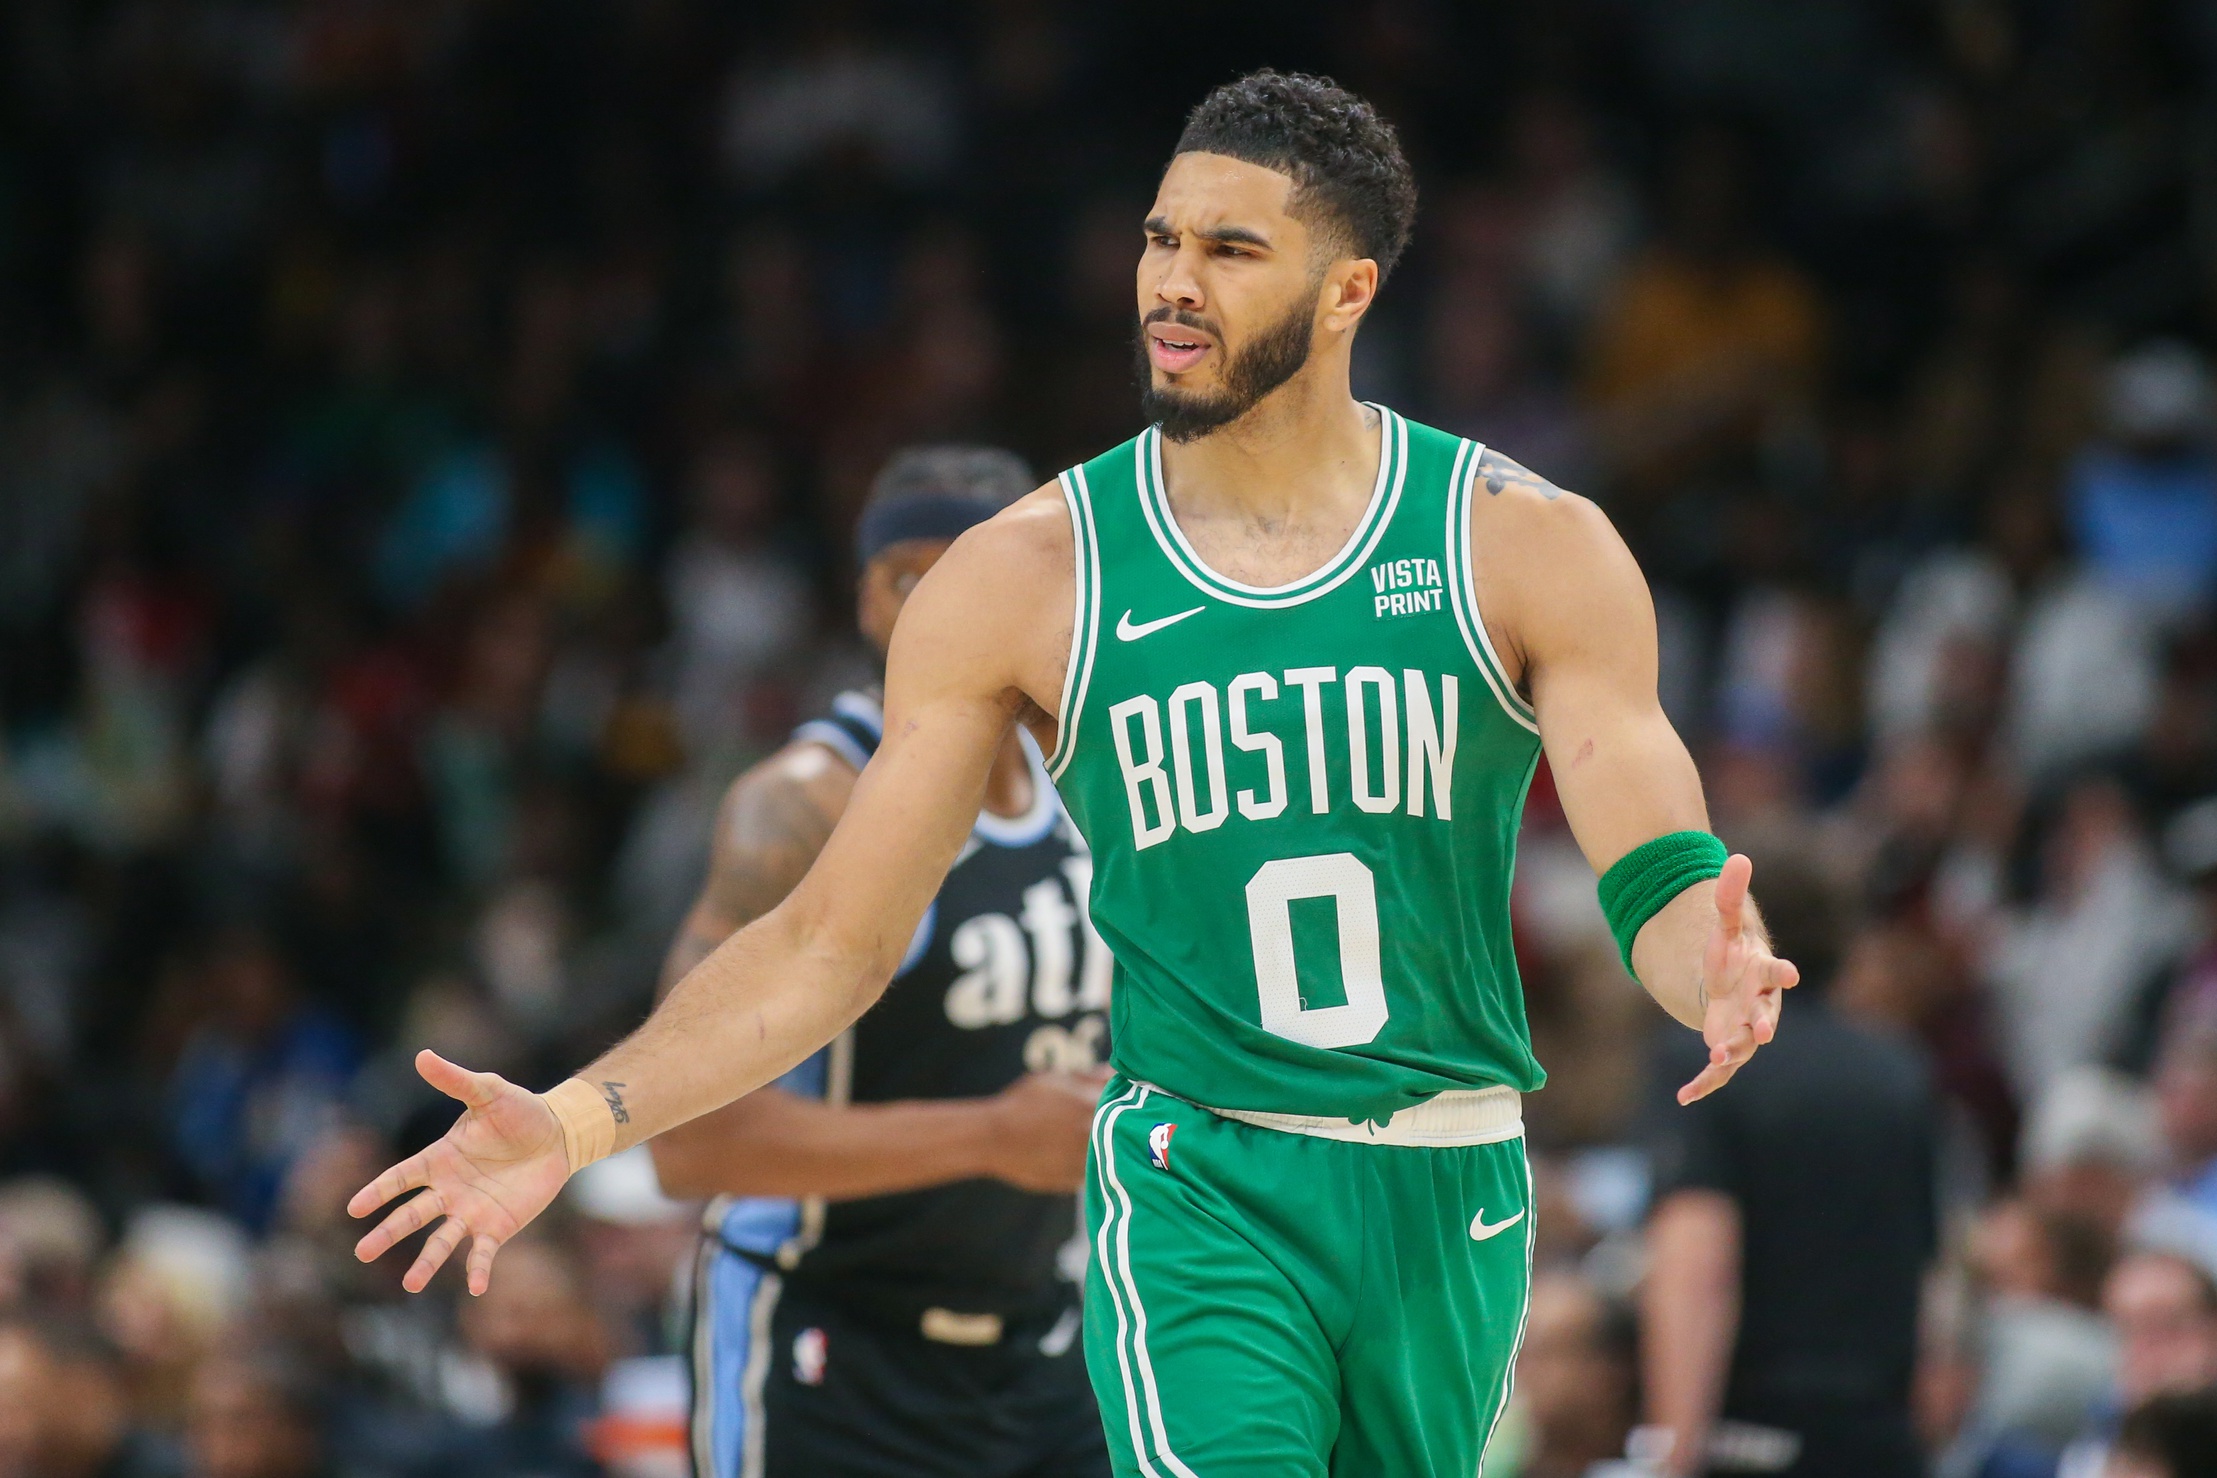 Jayson Tatum' clutch time play is connected to the Celtics success.